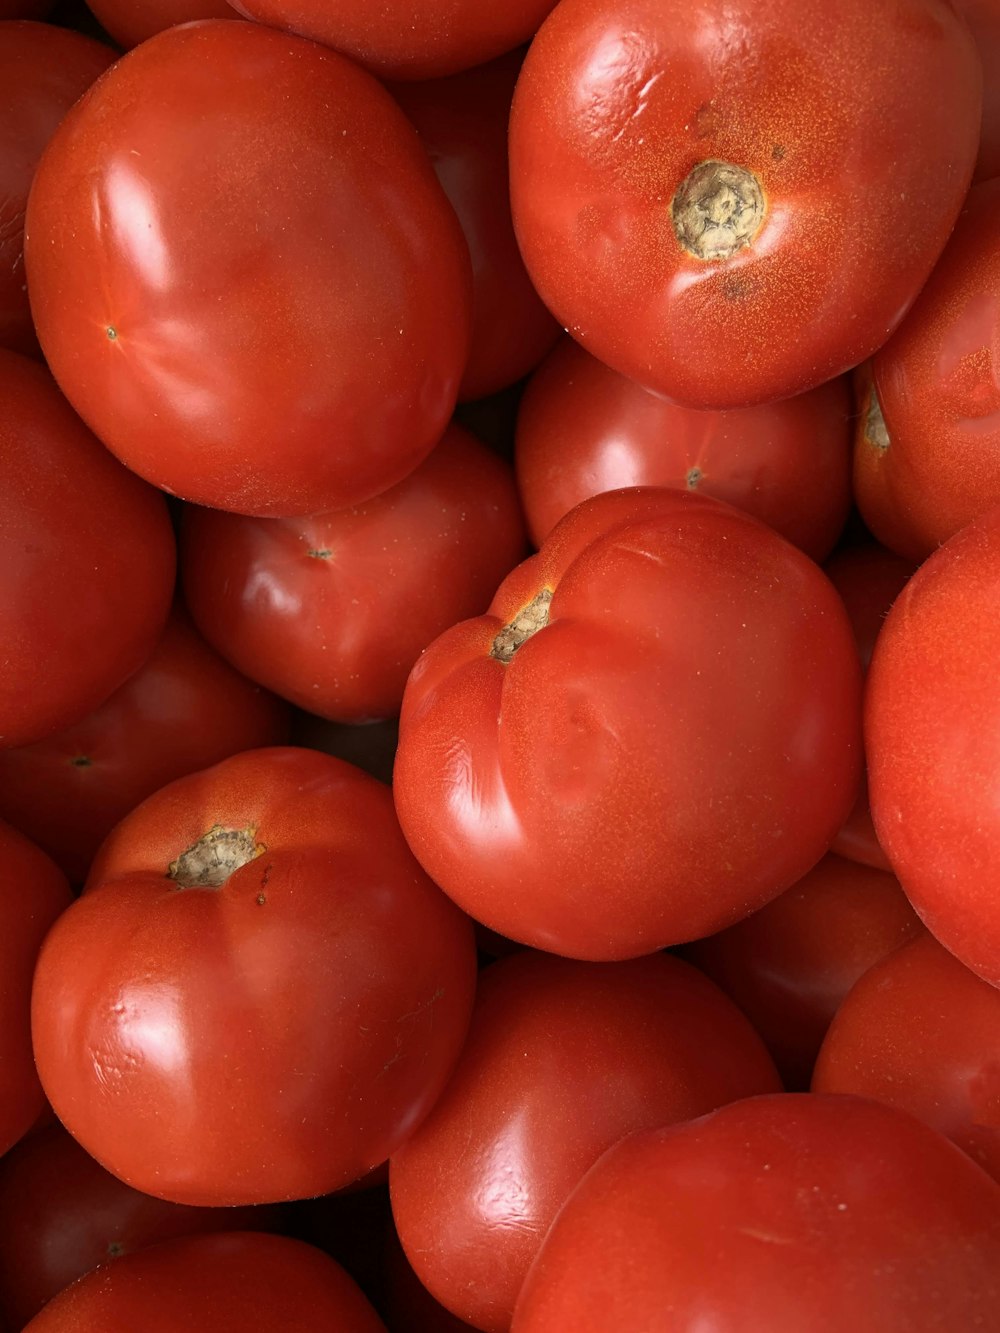 red tomato lot